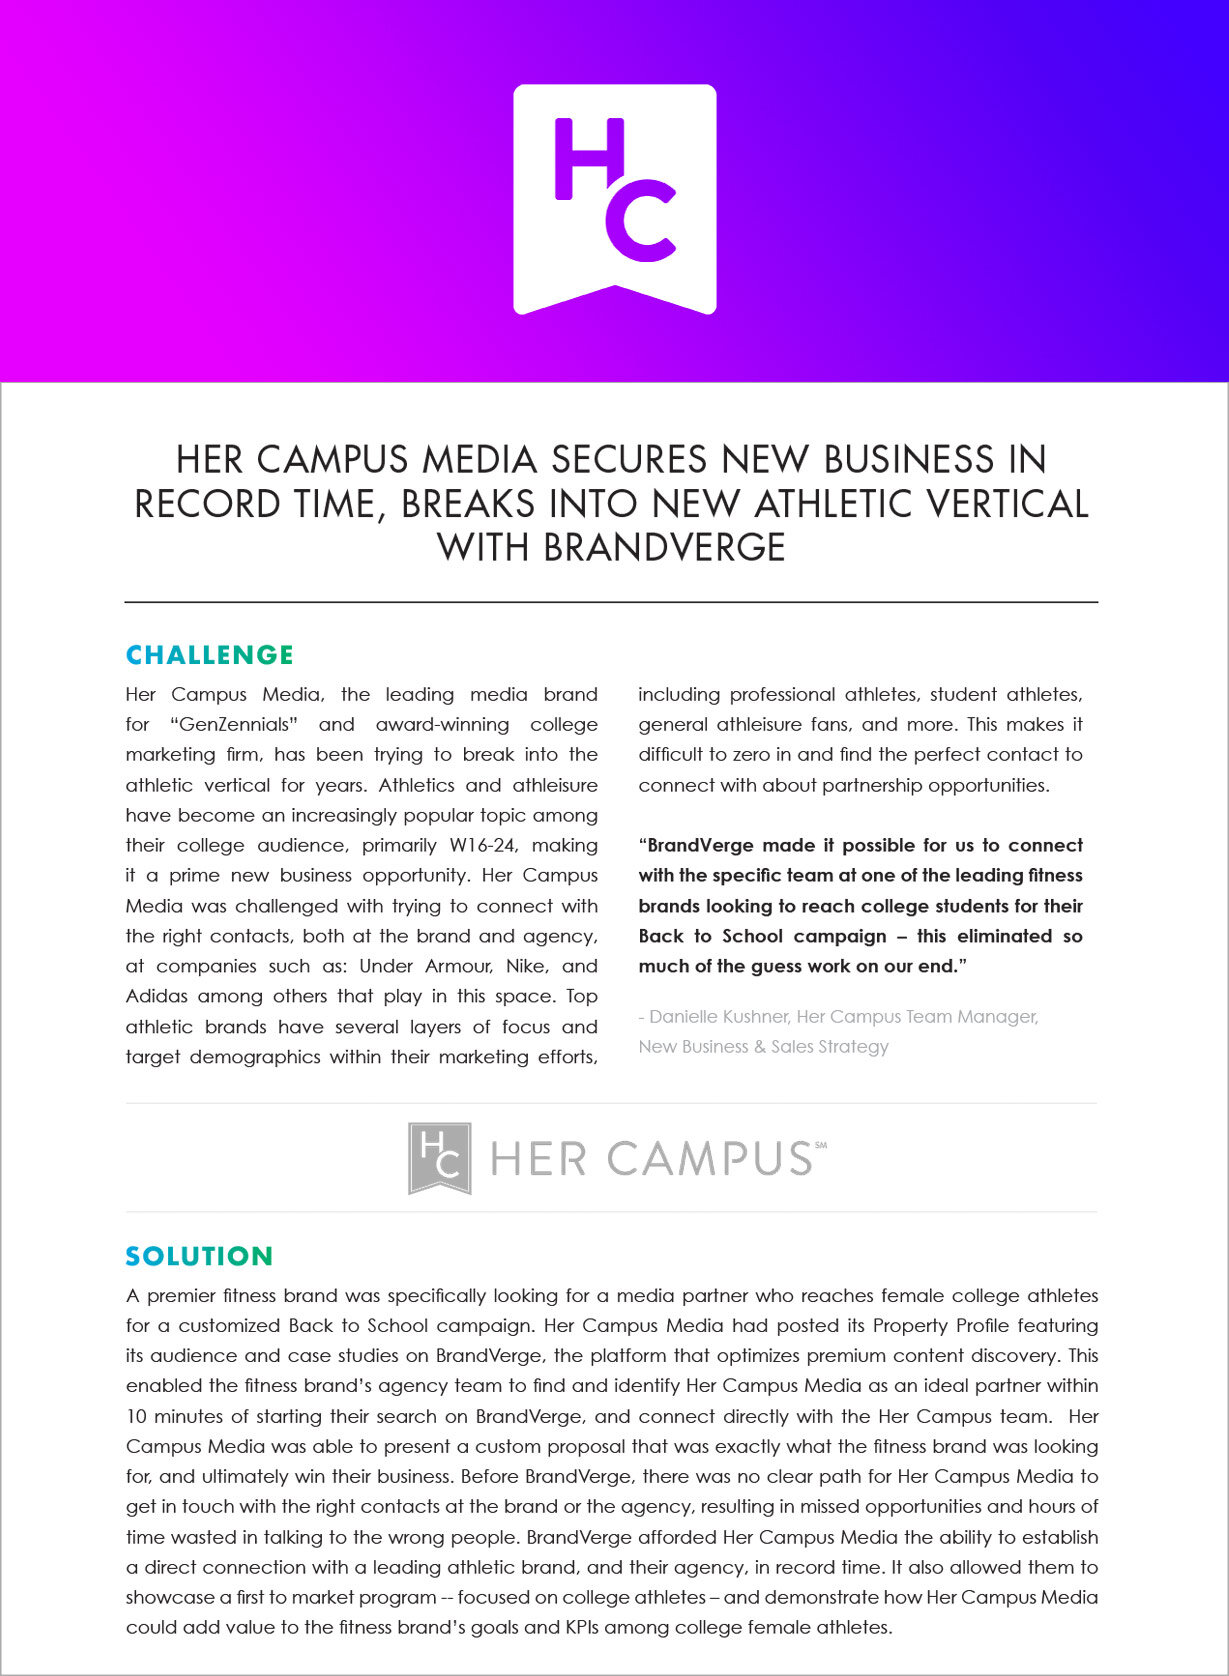 HER CAMPUS MEDIA SECURES NEW BUSINESS IN RECORD TIME, BREAKS INTO NEW ATHLETIC VERTICAL WITH BRANDVERGE